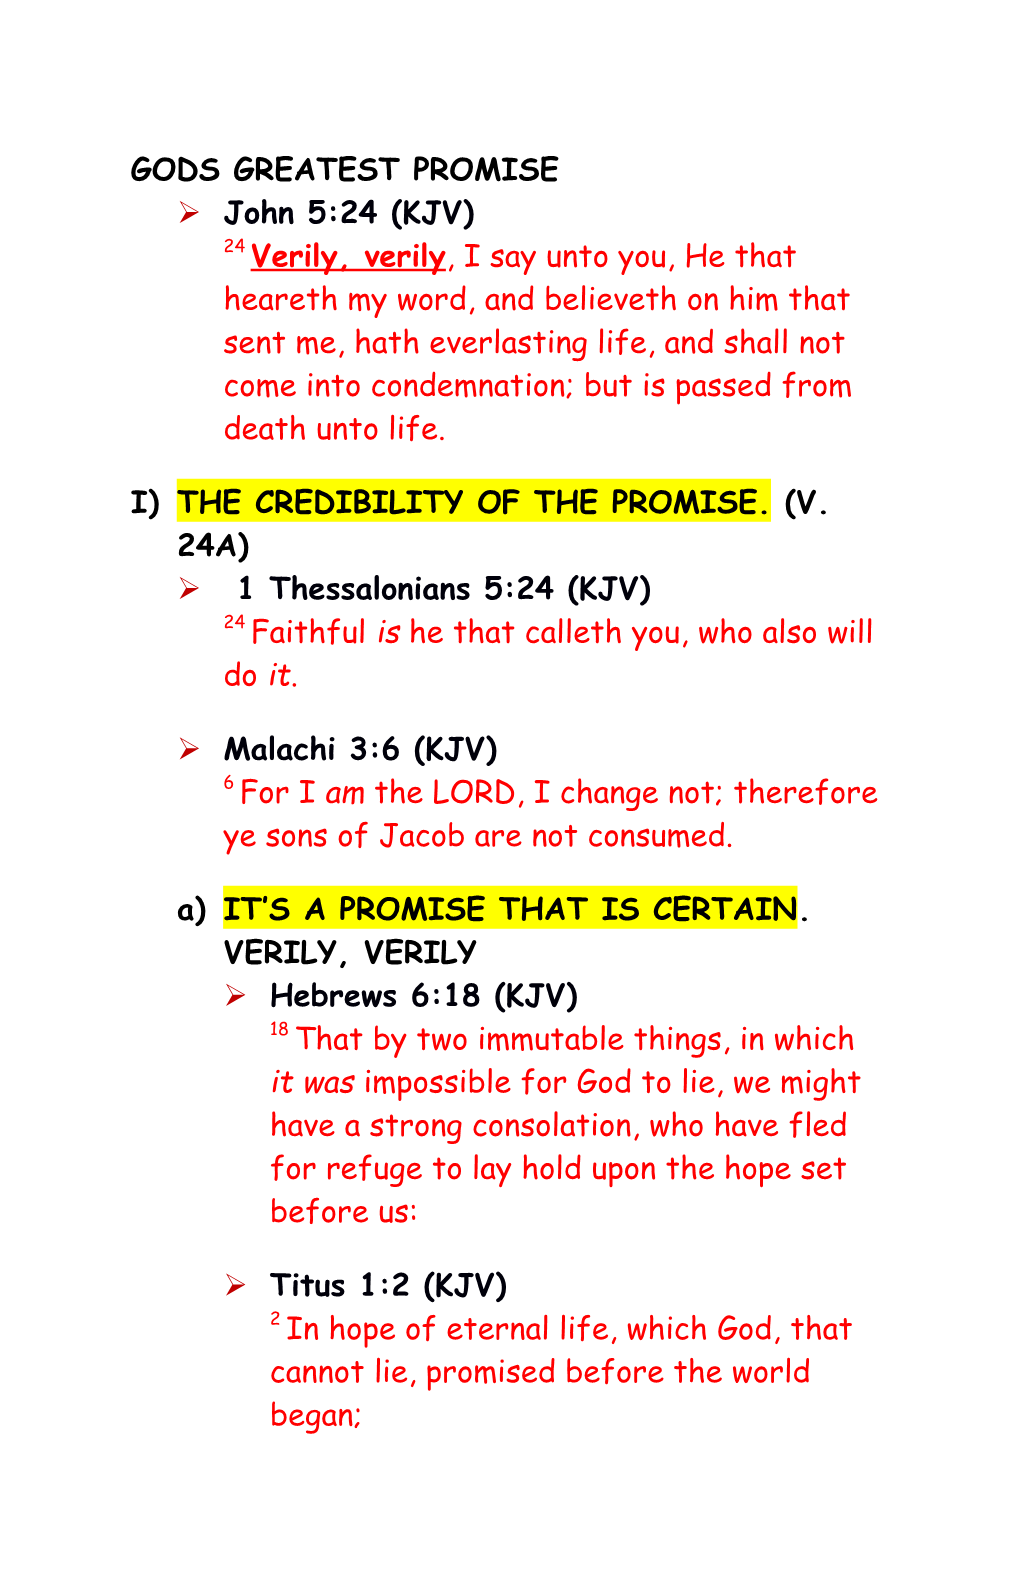 I)The CREDIBILITY of the Promise. (V. 24A)